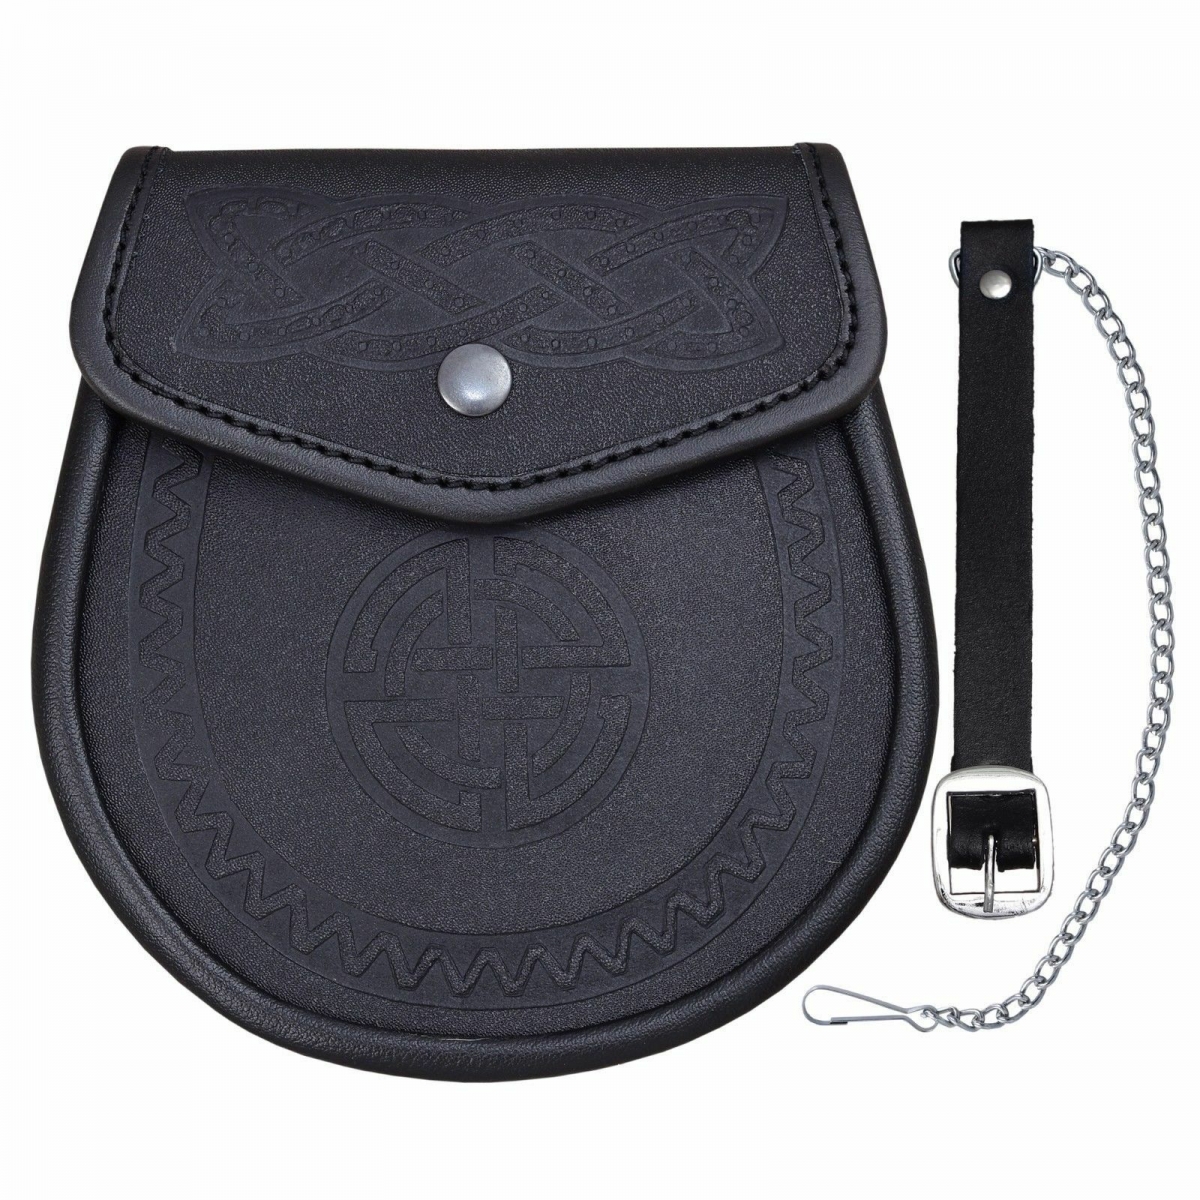 SPORRAN Smooth finish leather with Embossed Celtic design